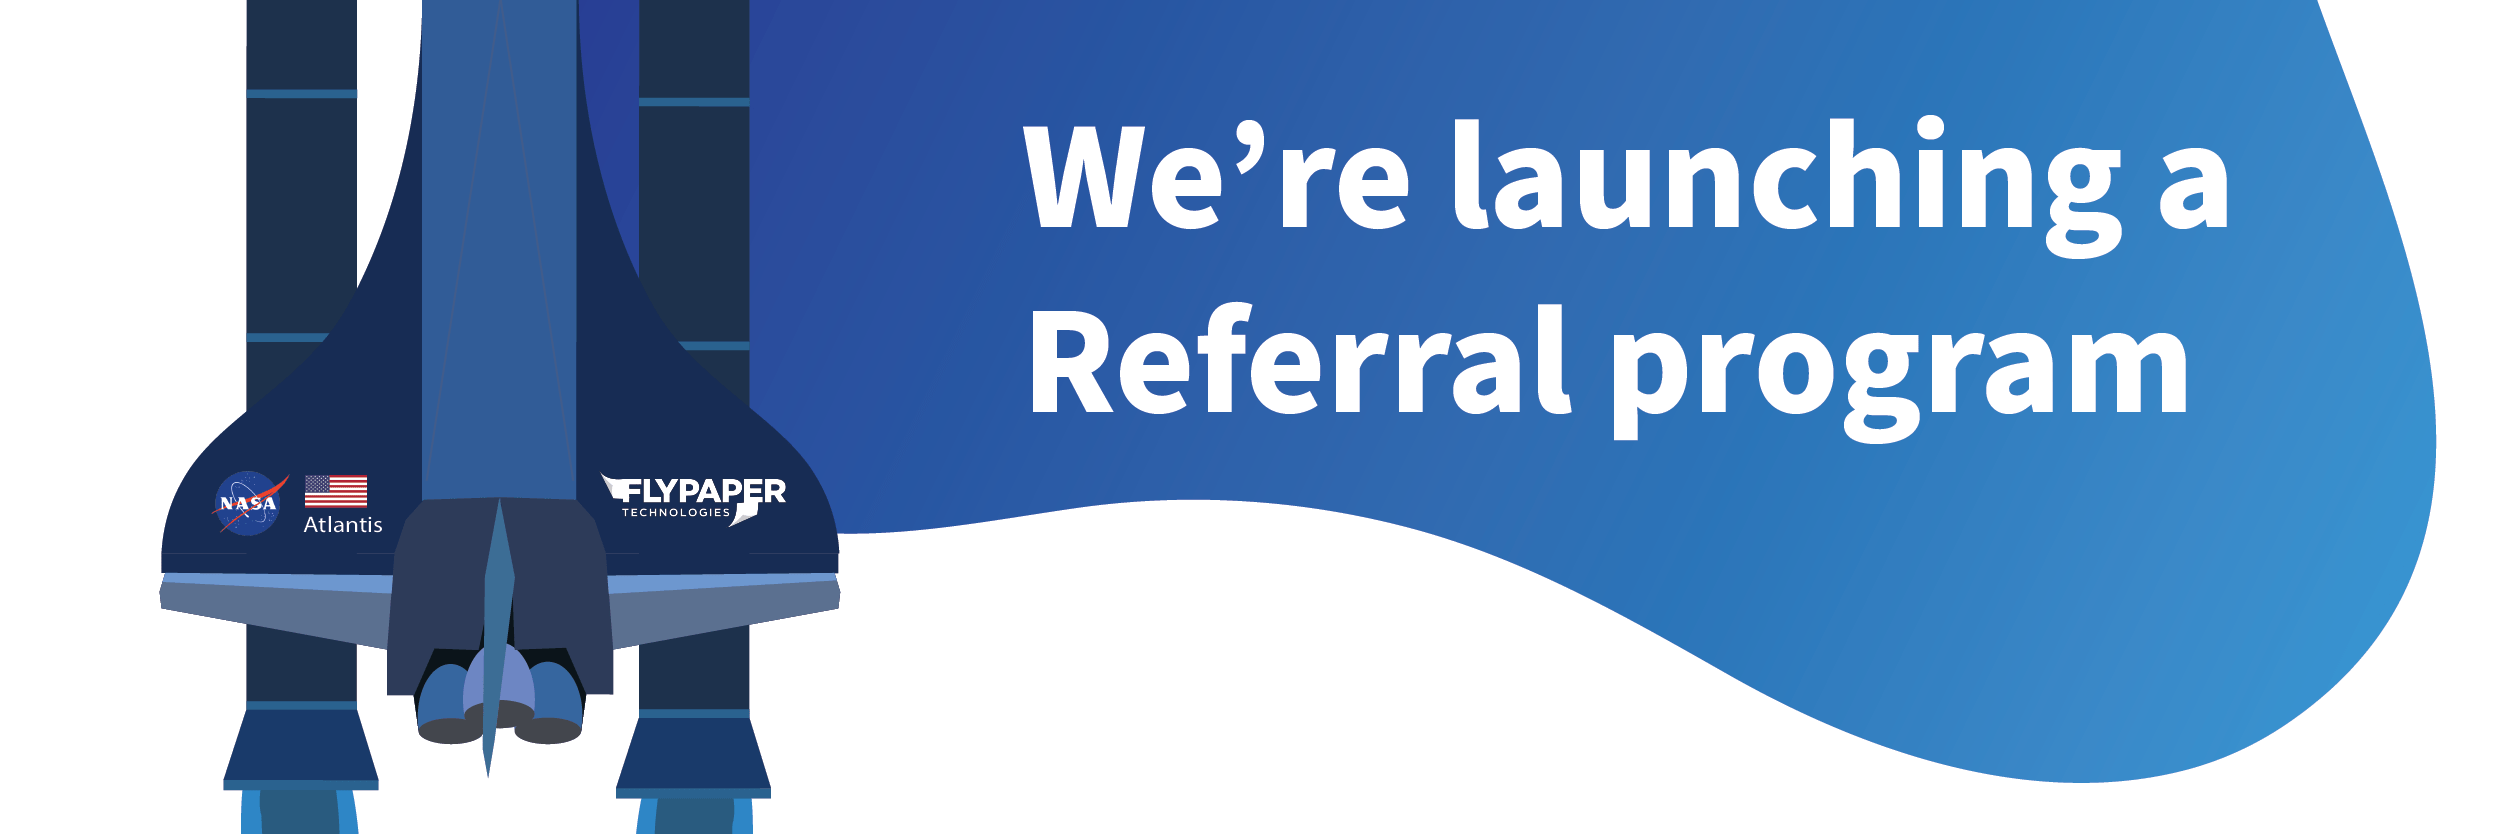 We're launching a referral program